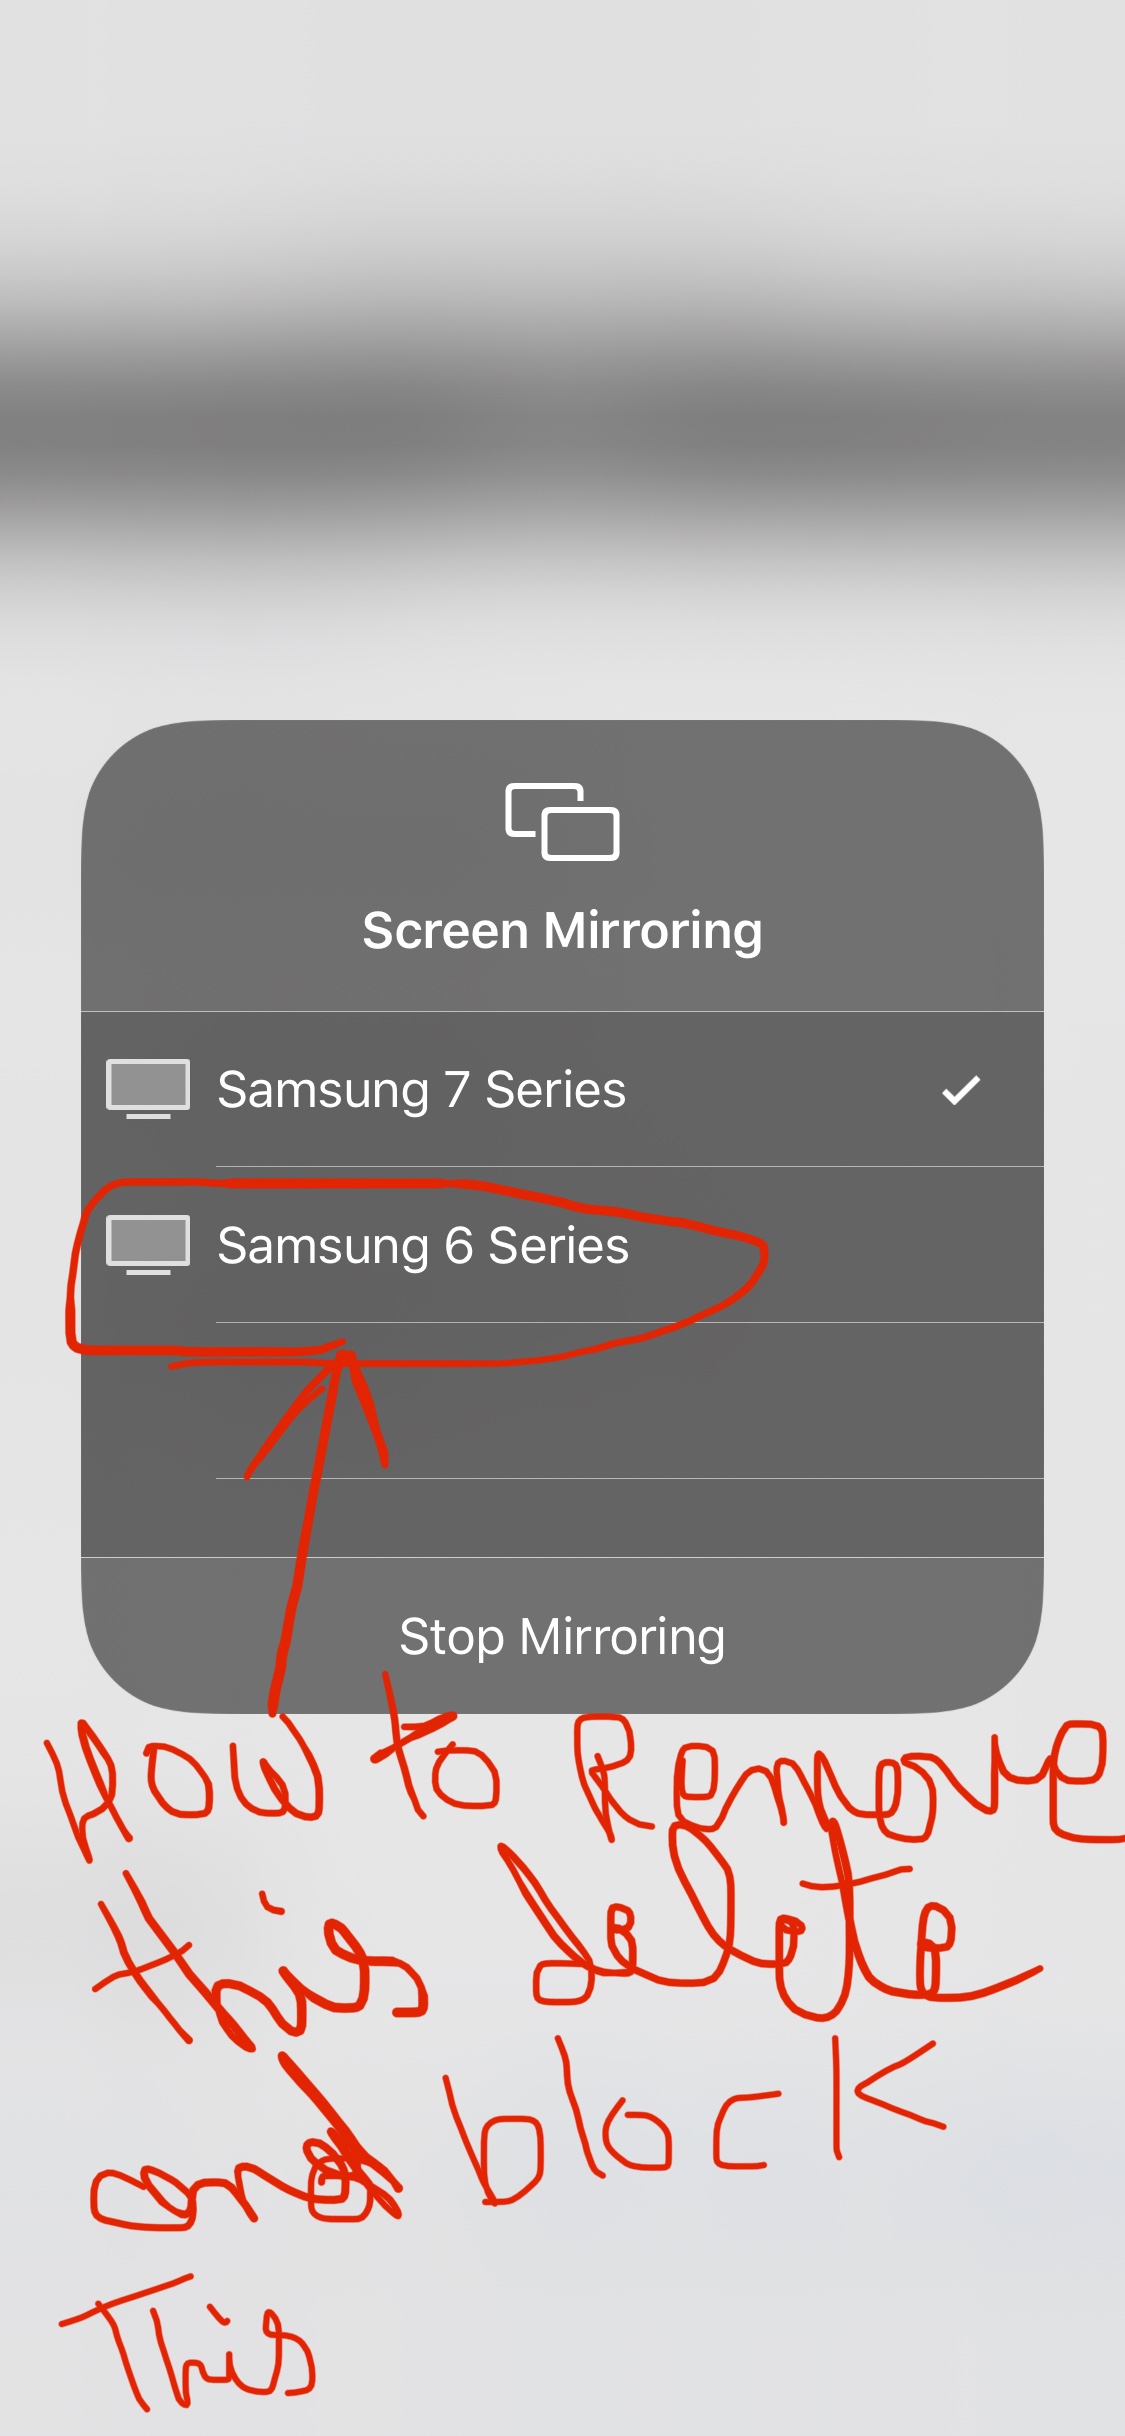 How To Remove Samsung Tv From Iphone, How To Mirror Apple Screen On Samsung Tv